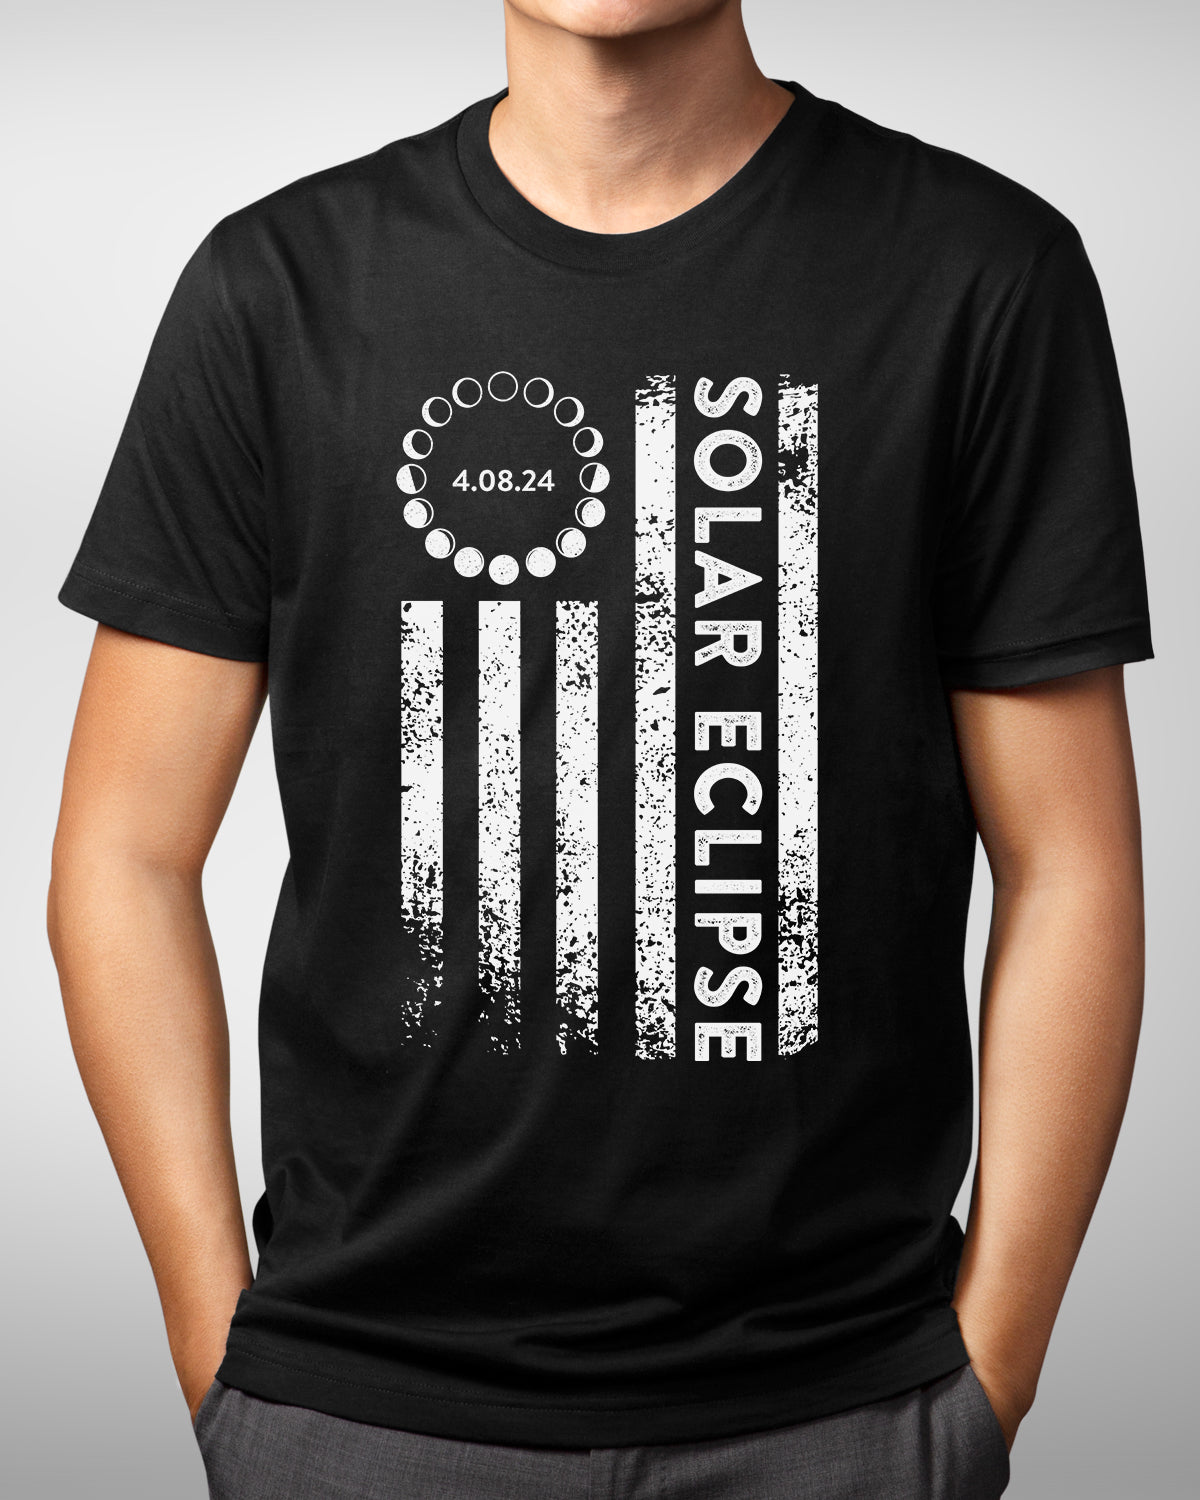 Vintage American Flag Solar Eclipse 2024 Shirt, April 8th Astronomy Tee, Path of Totality Spring Souvenir